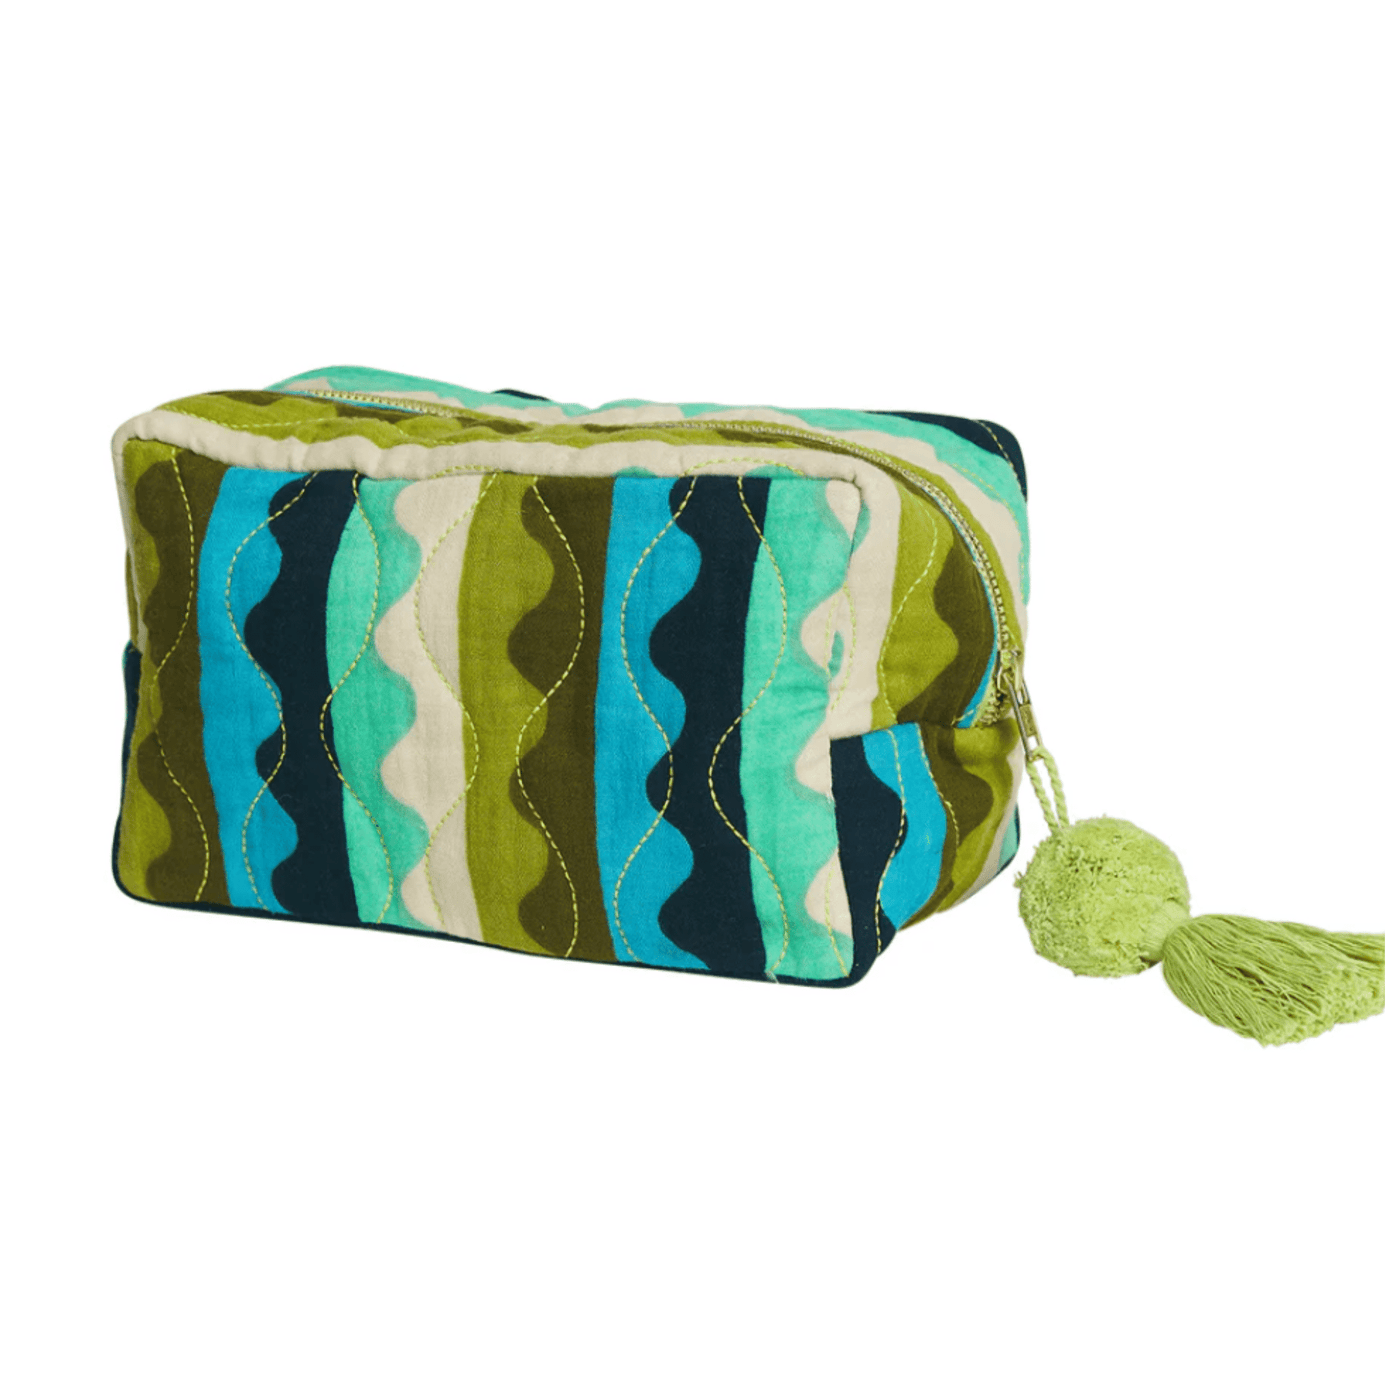 Sage and Clare Bungee Beauty Bag